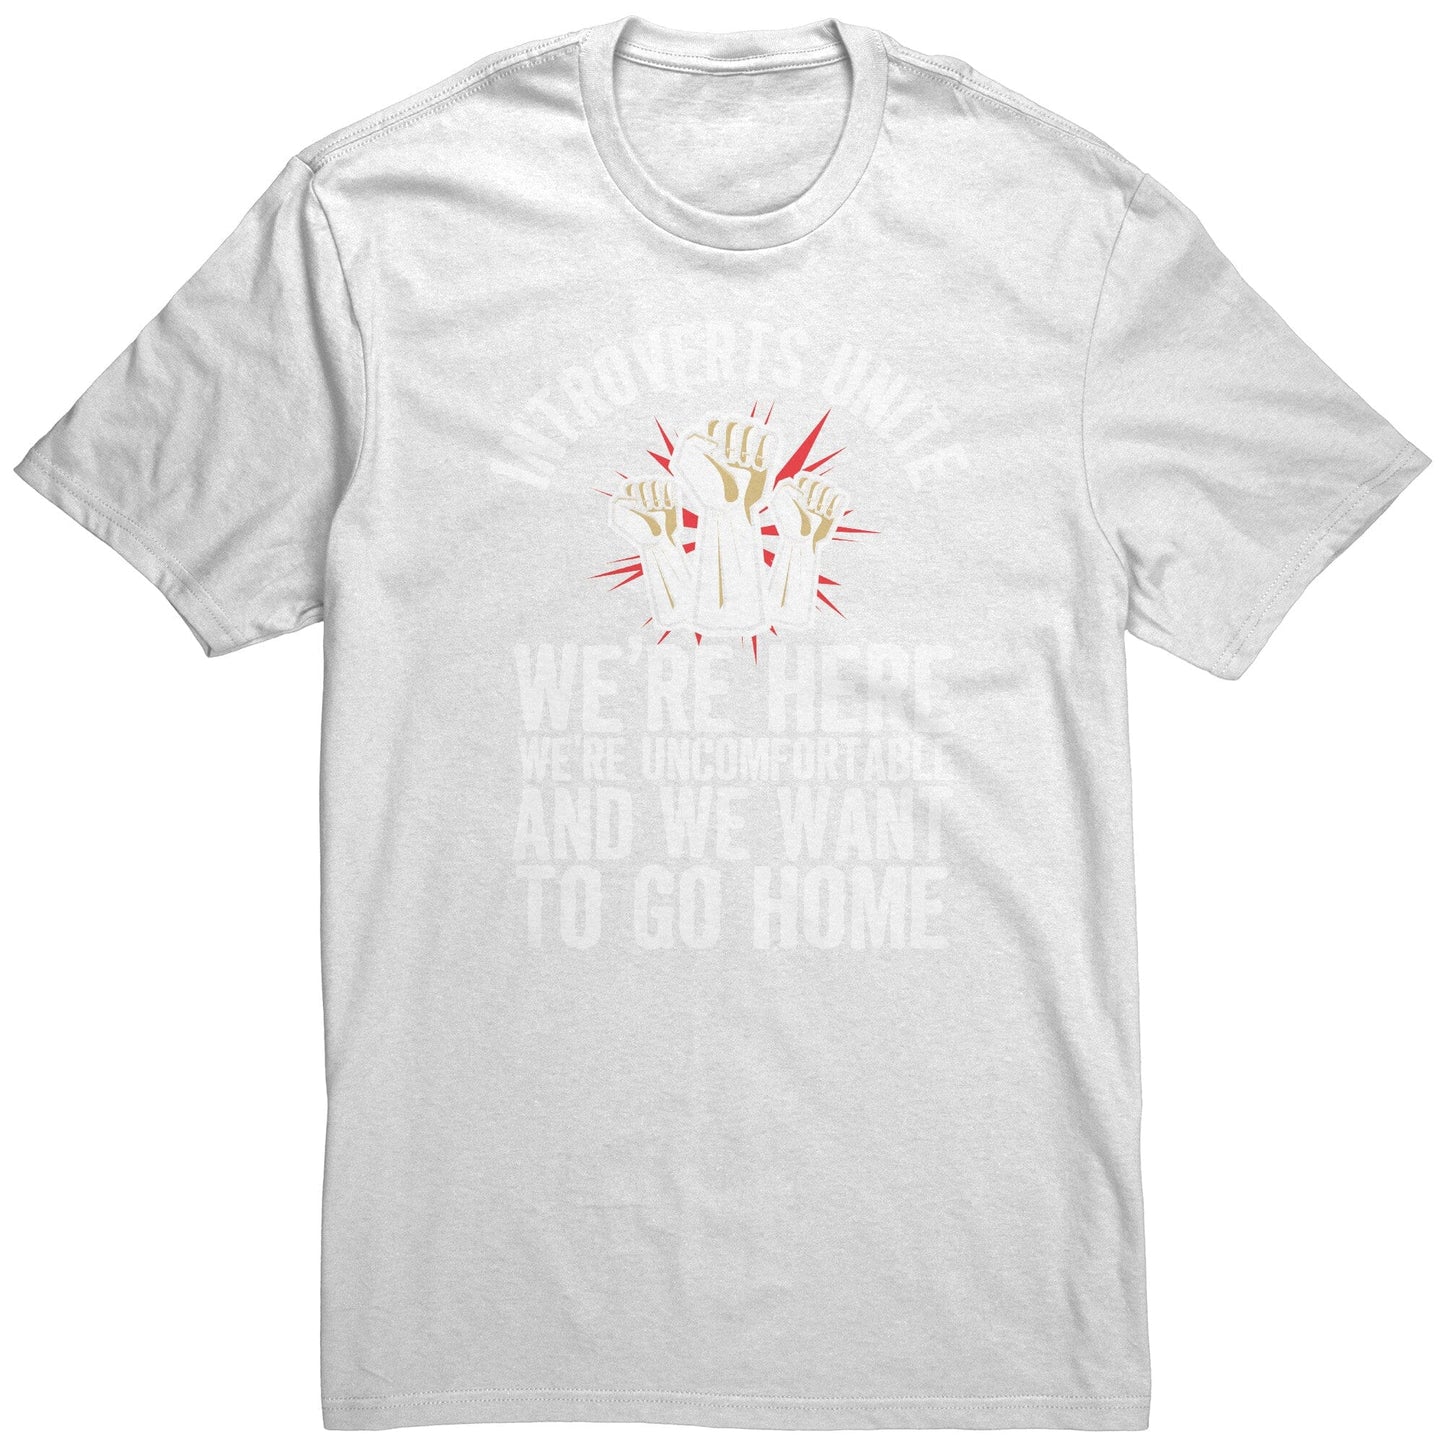 Funny "Introverts Unite - We're Here, We're Uncomfortable, and We Want To Go Home" Shirt Apparel Heathered Grey S 